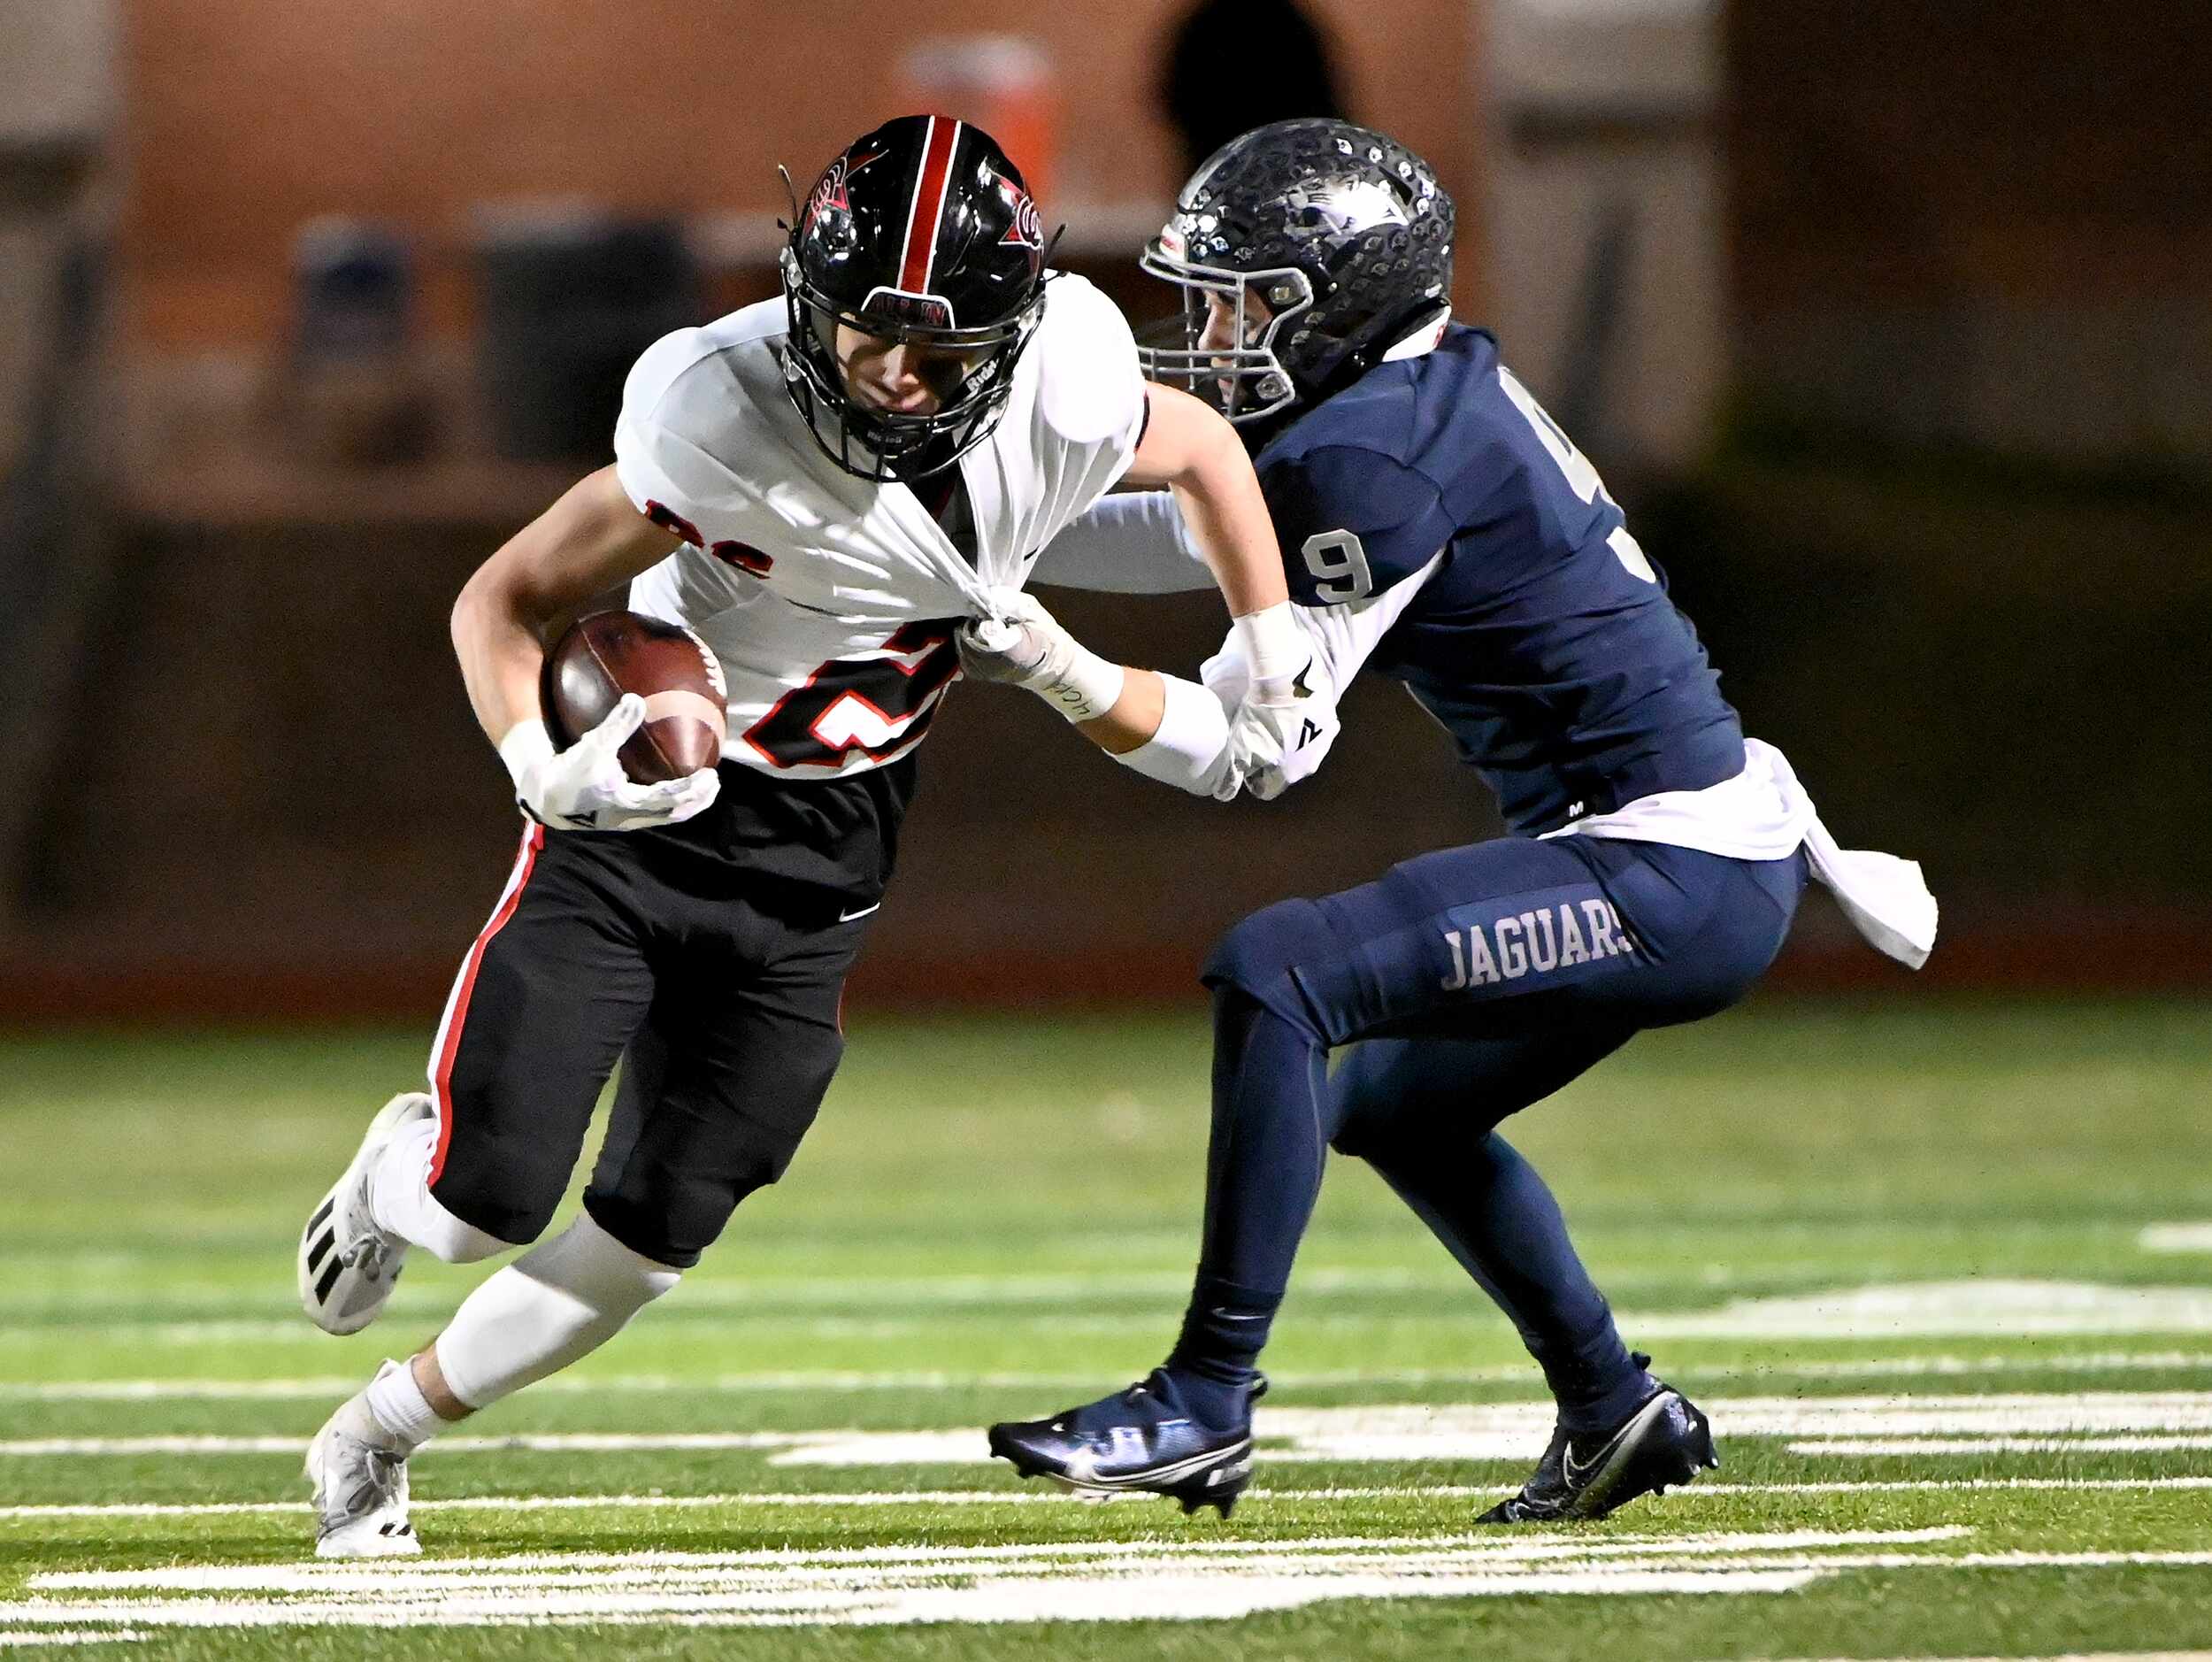 Coppell's Zack Darkoch (26) tries to get away from a tackle attempt by Flower Mound's Caleb...